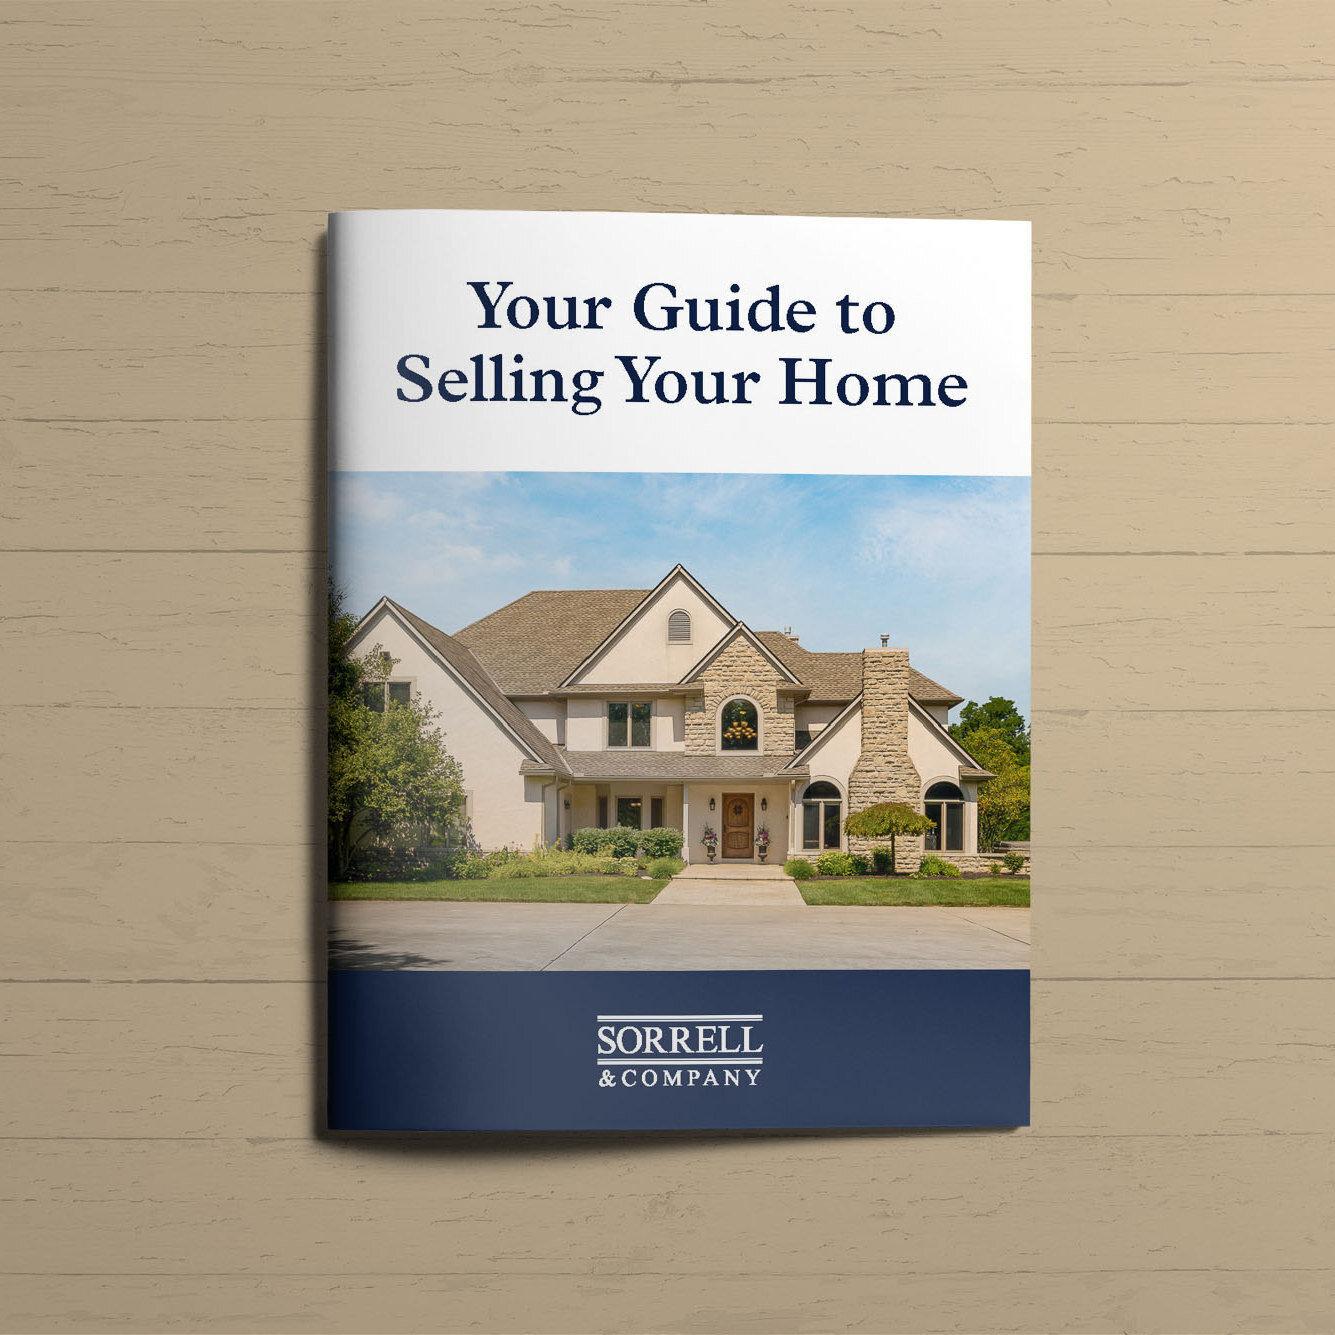 Home selling guide for sorrell and company